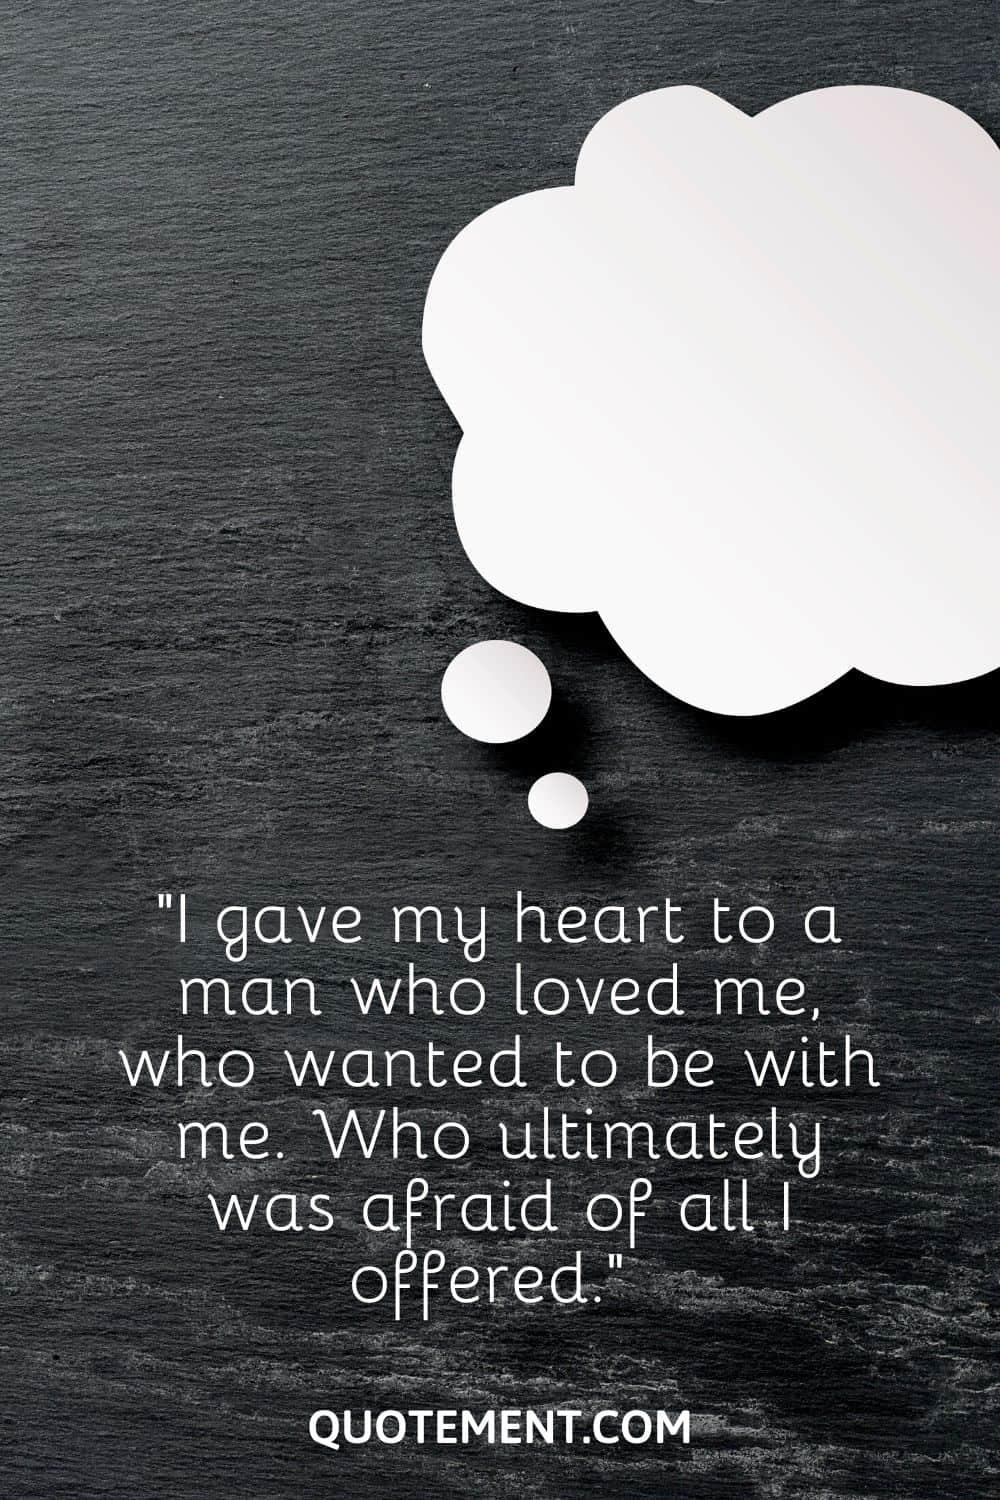 “I gave my heart to a man who loved me, who wanted to be with me. Who ultimately was afraid of all I offered.” 